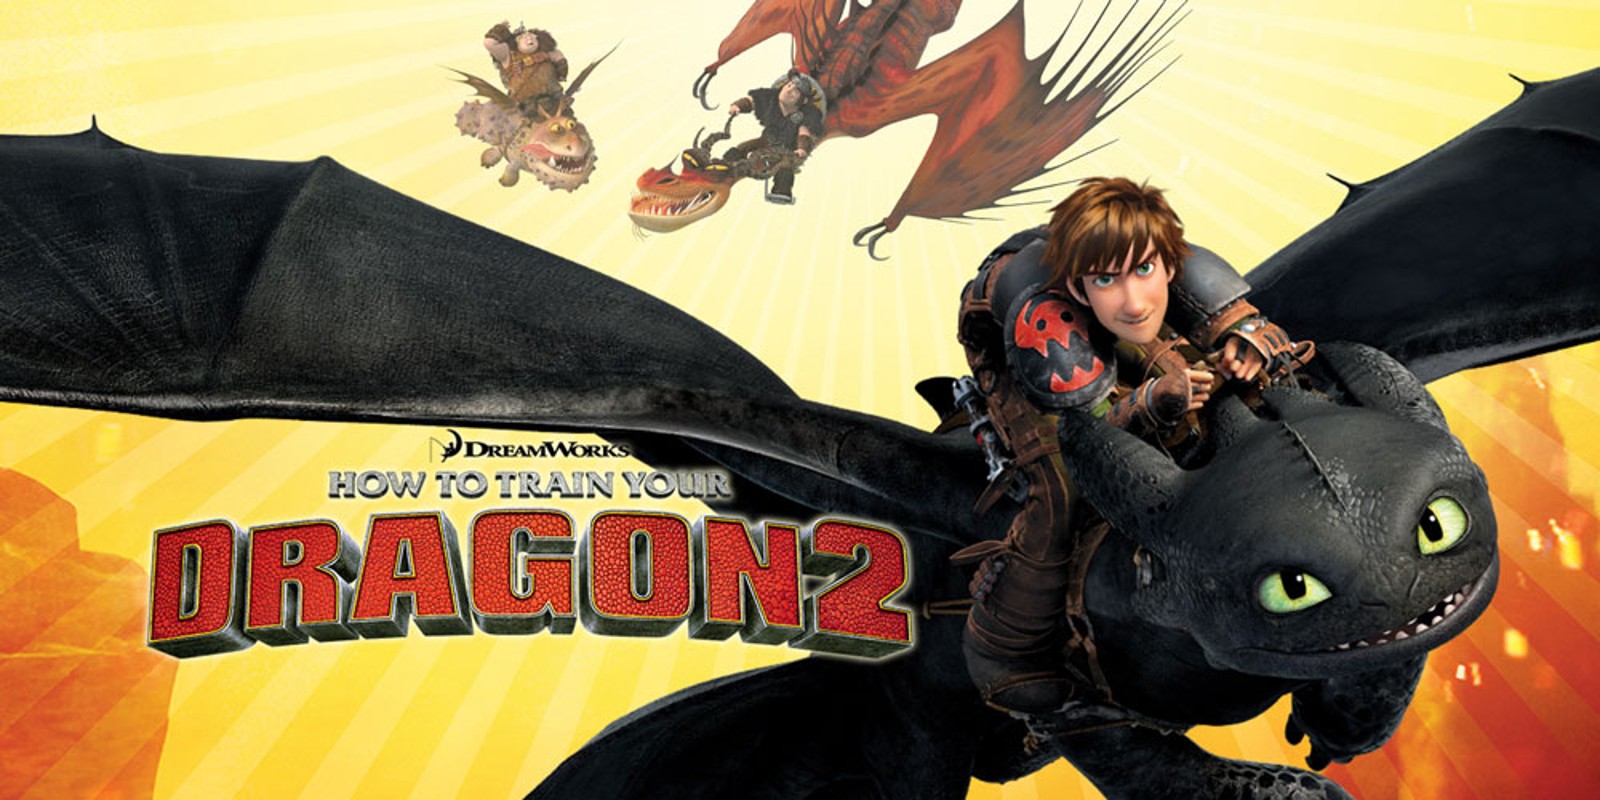 jas tunnel campus How to Train Your Dragon 2 | Wii U games | Games | Nintendo